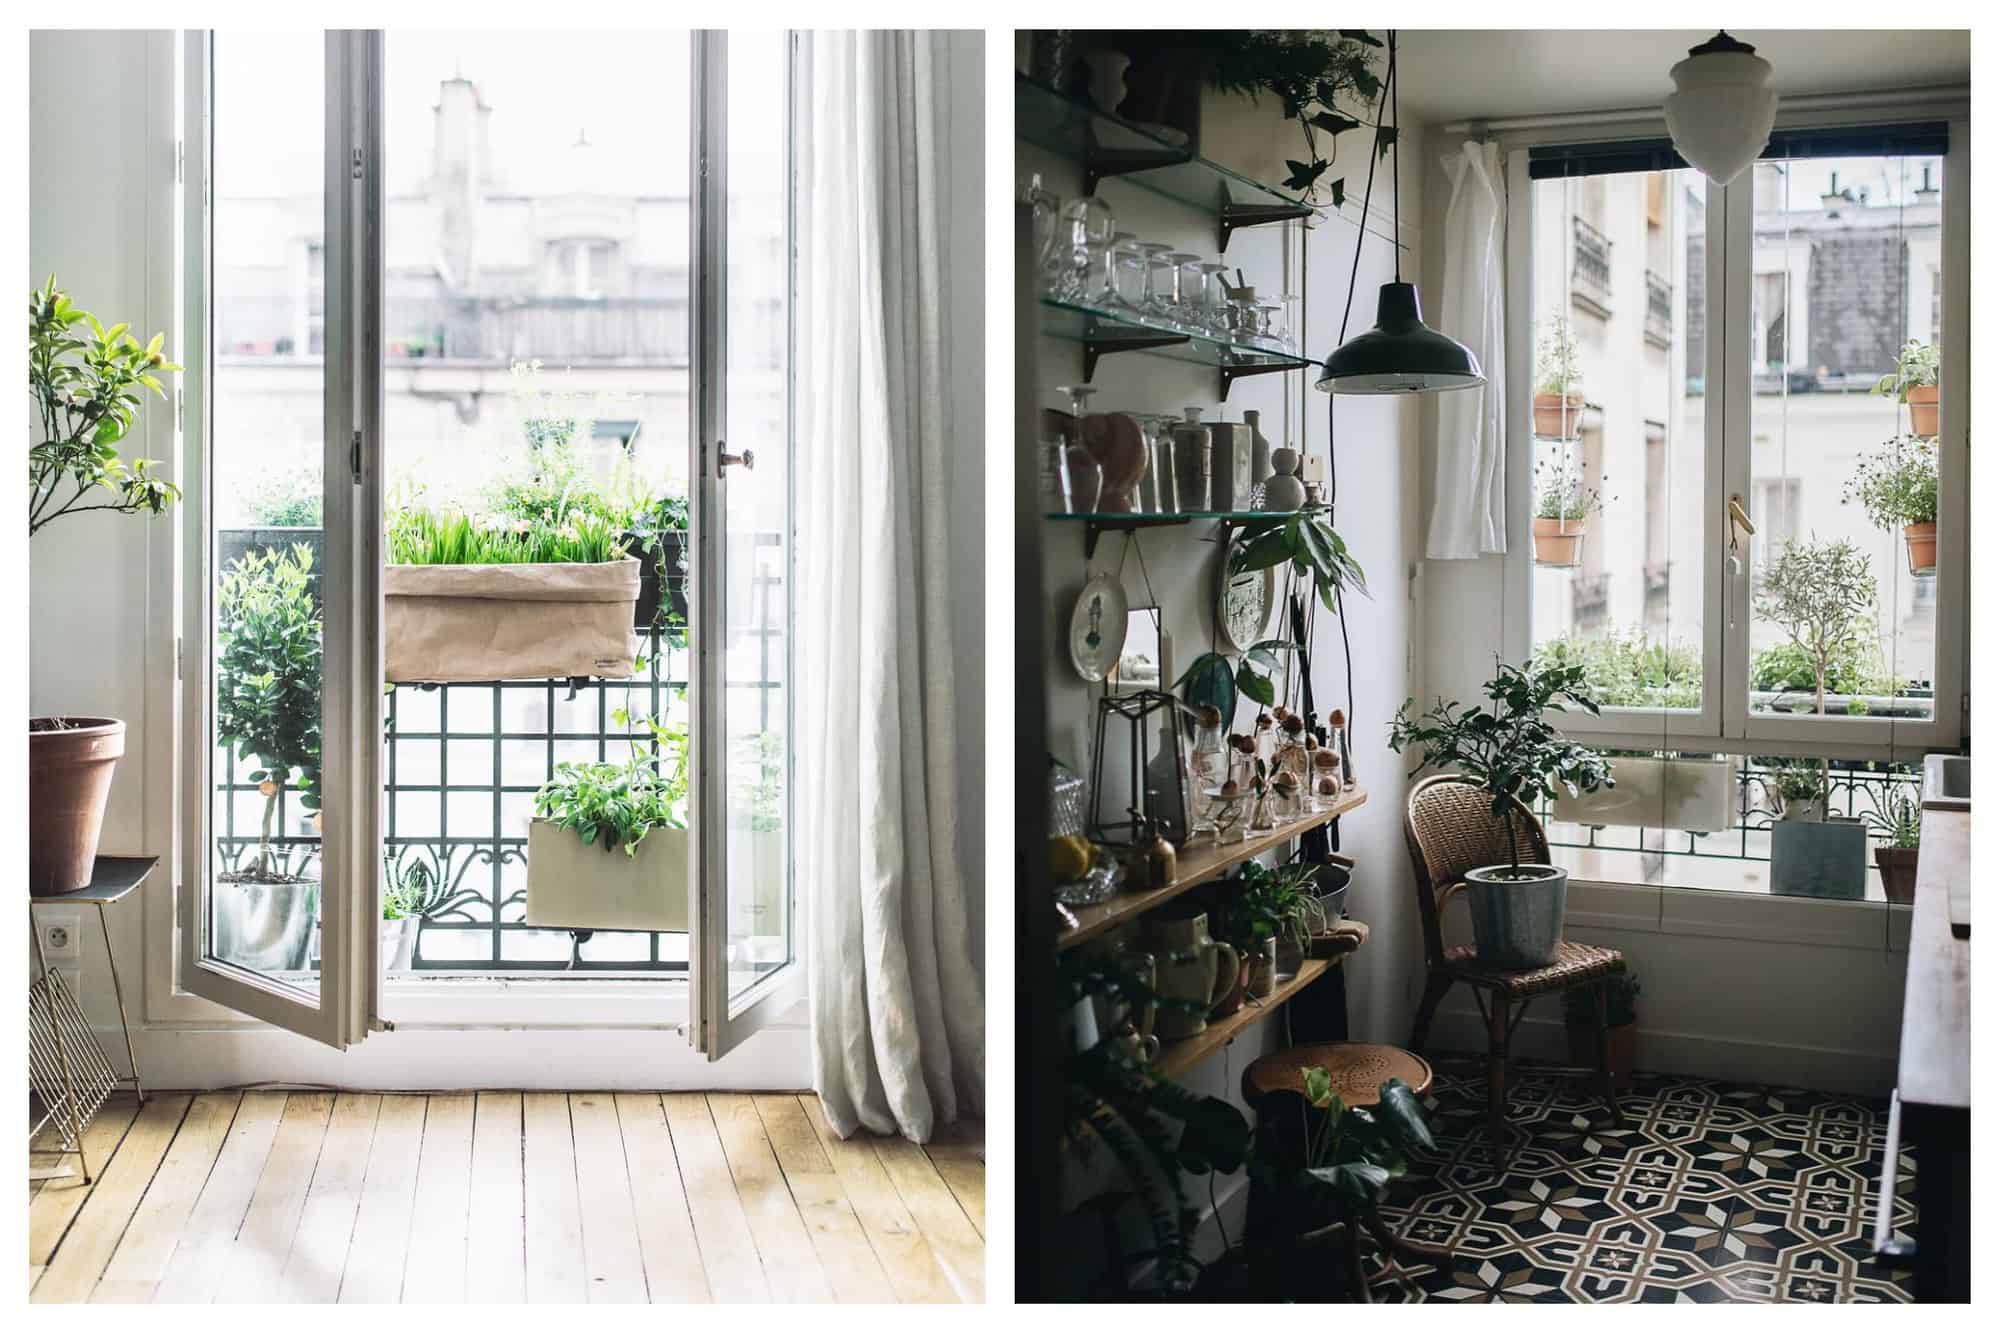 Left: A photo of a Parisian apartment located in the 11th arrondissement. Captured is a set of french windows with off-white curtains, opening to a small balcony with outdoor plants hanging by the fence. Right: A picture of the same apartment in the 11th arrondissement of Paris. In the shot is the kitchen filled with houseplants, particularly a set of avocado seeds being propagated using glasses with water. A ficus tree sits in a brown woven chair beside a window overlooking the court of the building. Hanging plants can also be seen along with outdoor plants through the window.